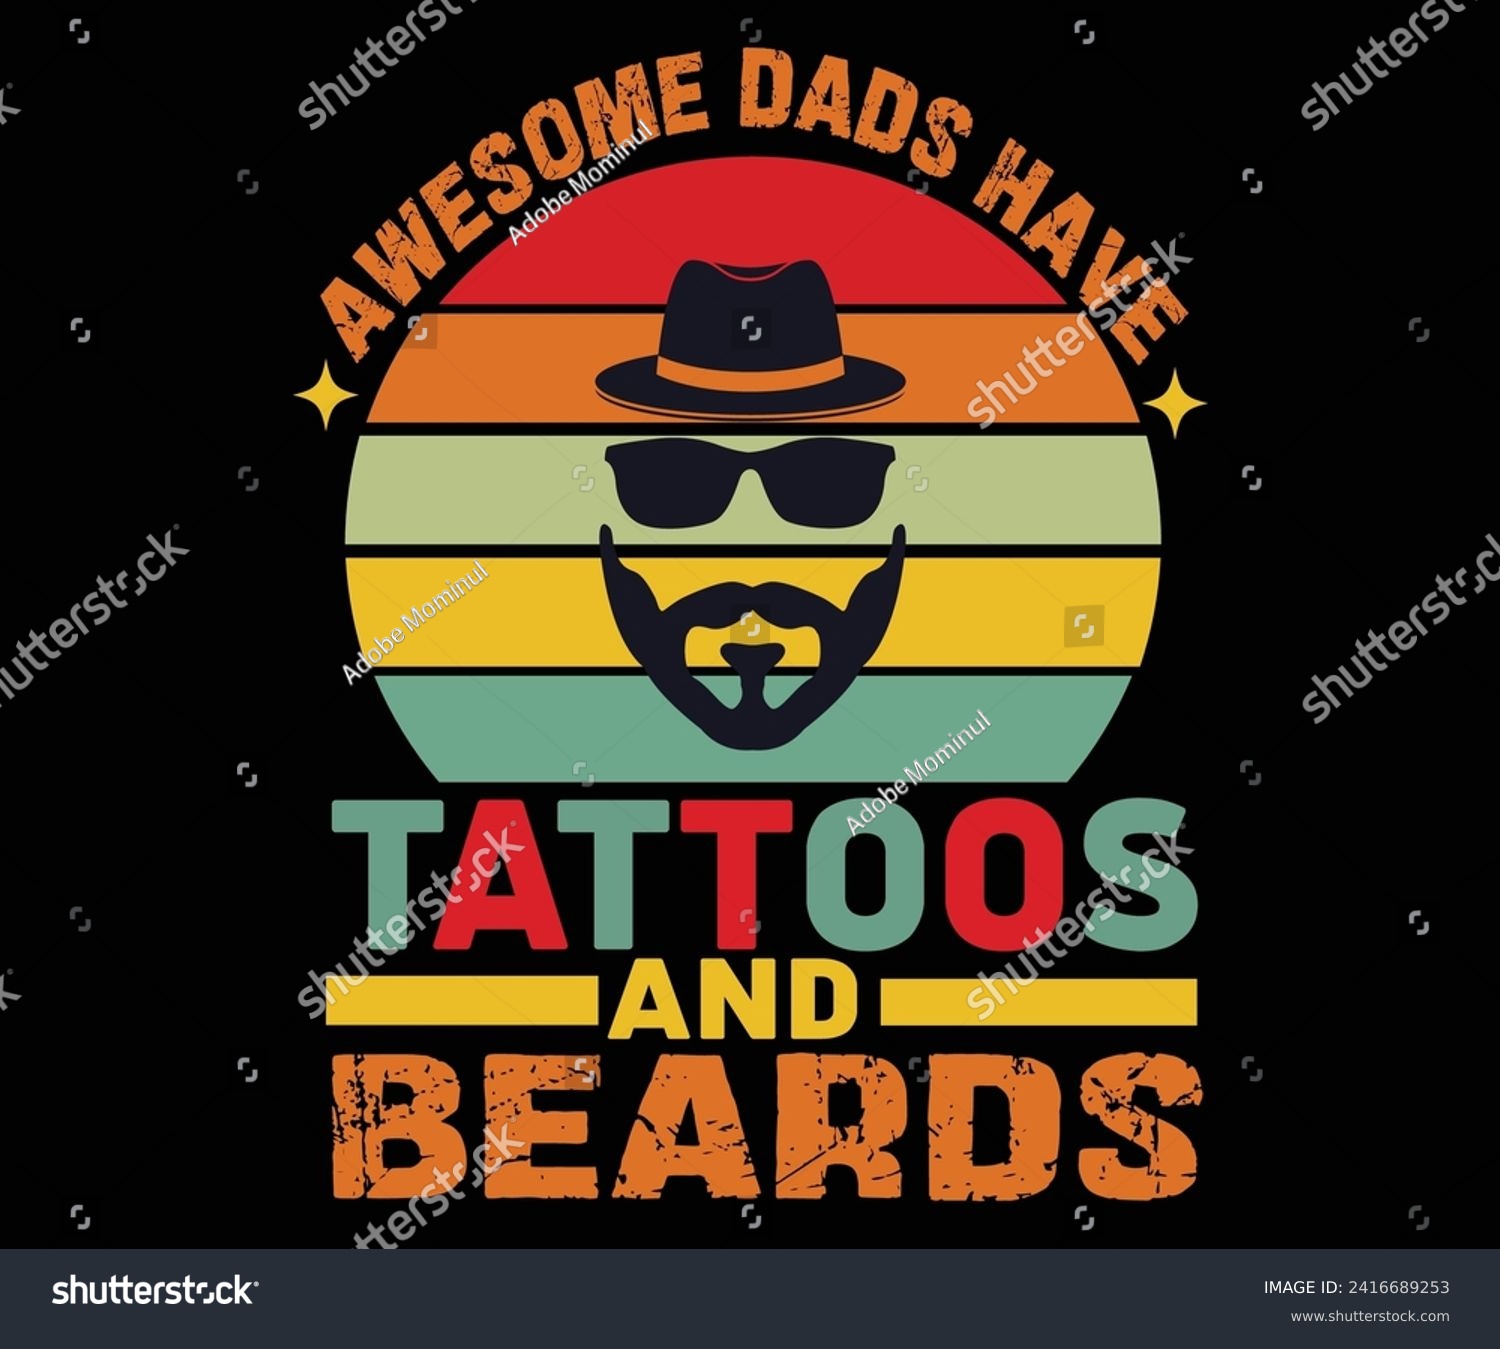 SVG of 
Awesome Dads Have Tattoos and Beards Retro Vintage,Father's Day Svg,Papa svg,Grandpa Svg,Father's Day Saying Qoutes,Dad Svg,Funny Father, Gift For Dad Svg,,Family Svg,T shirt Design,Typography, svg